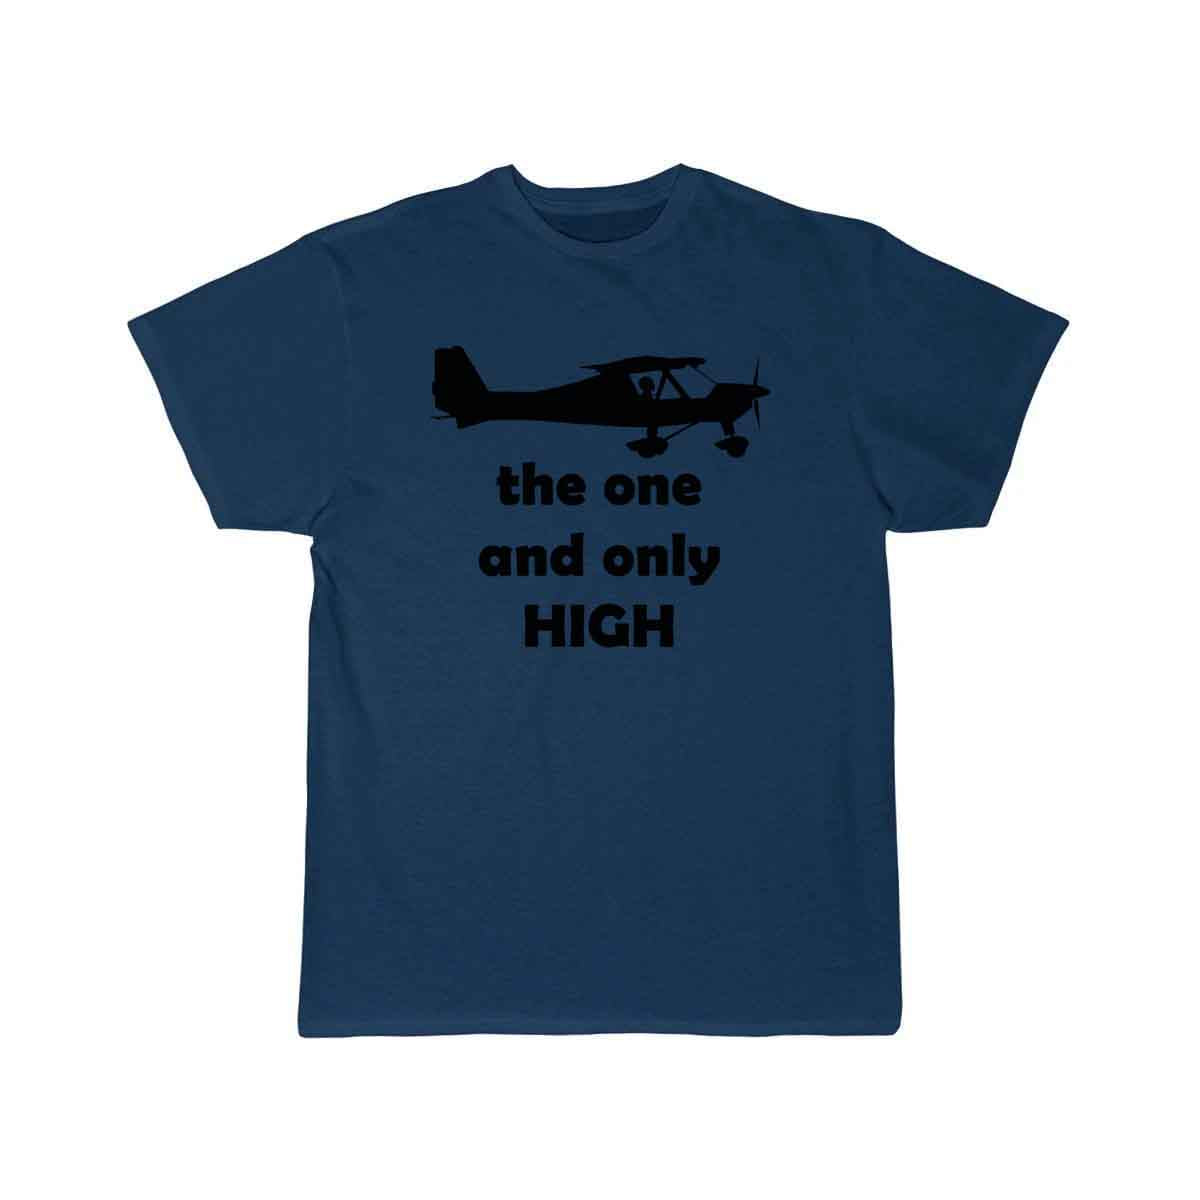 the one and only high is to fly T SHIRT THE AV8R